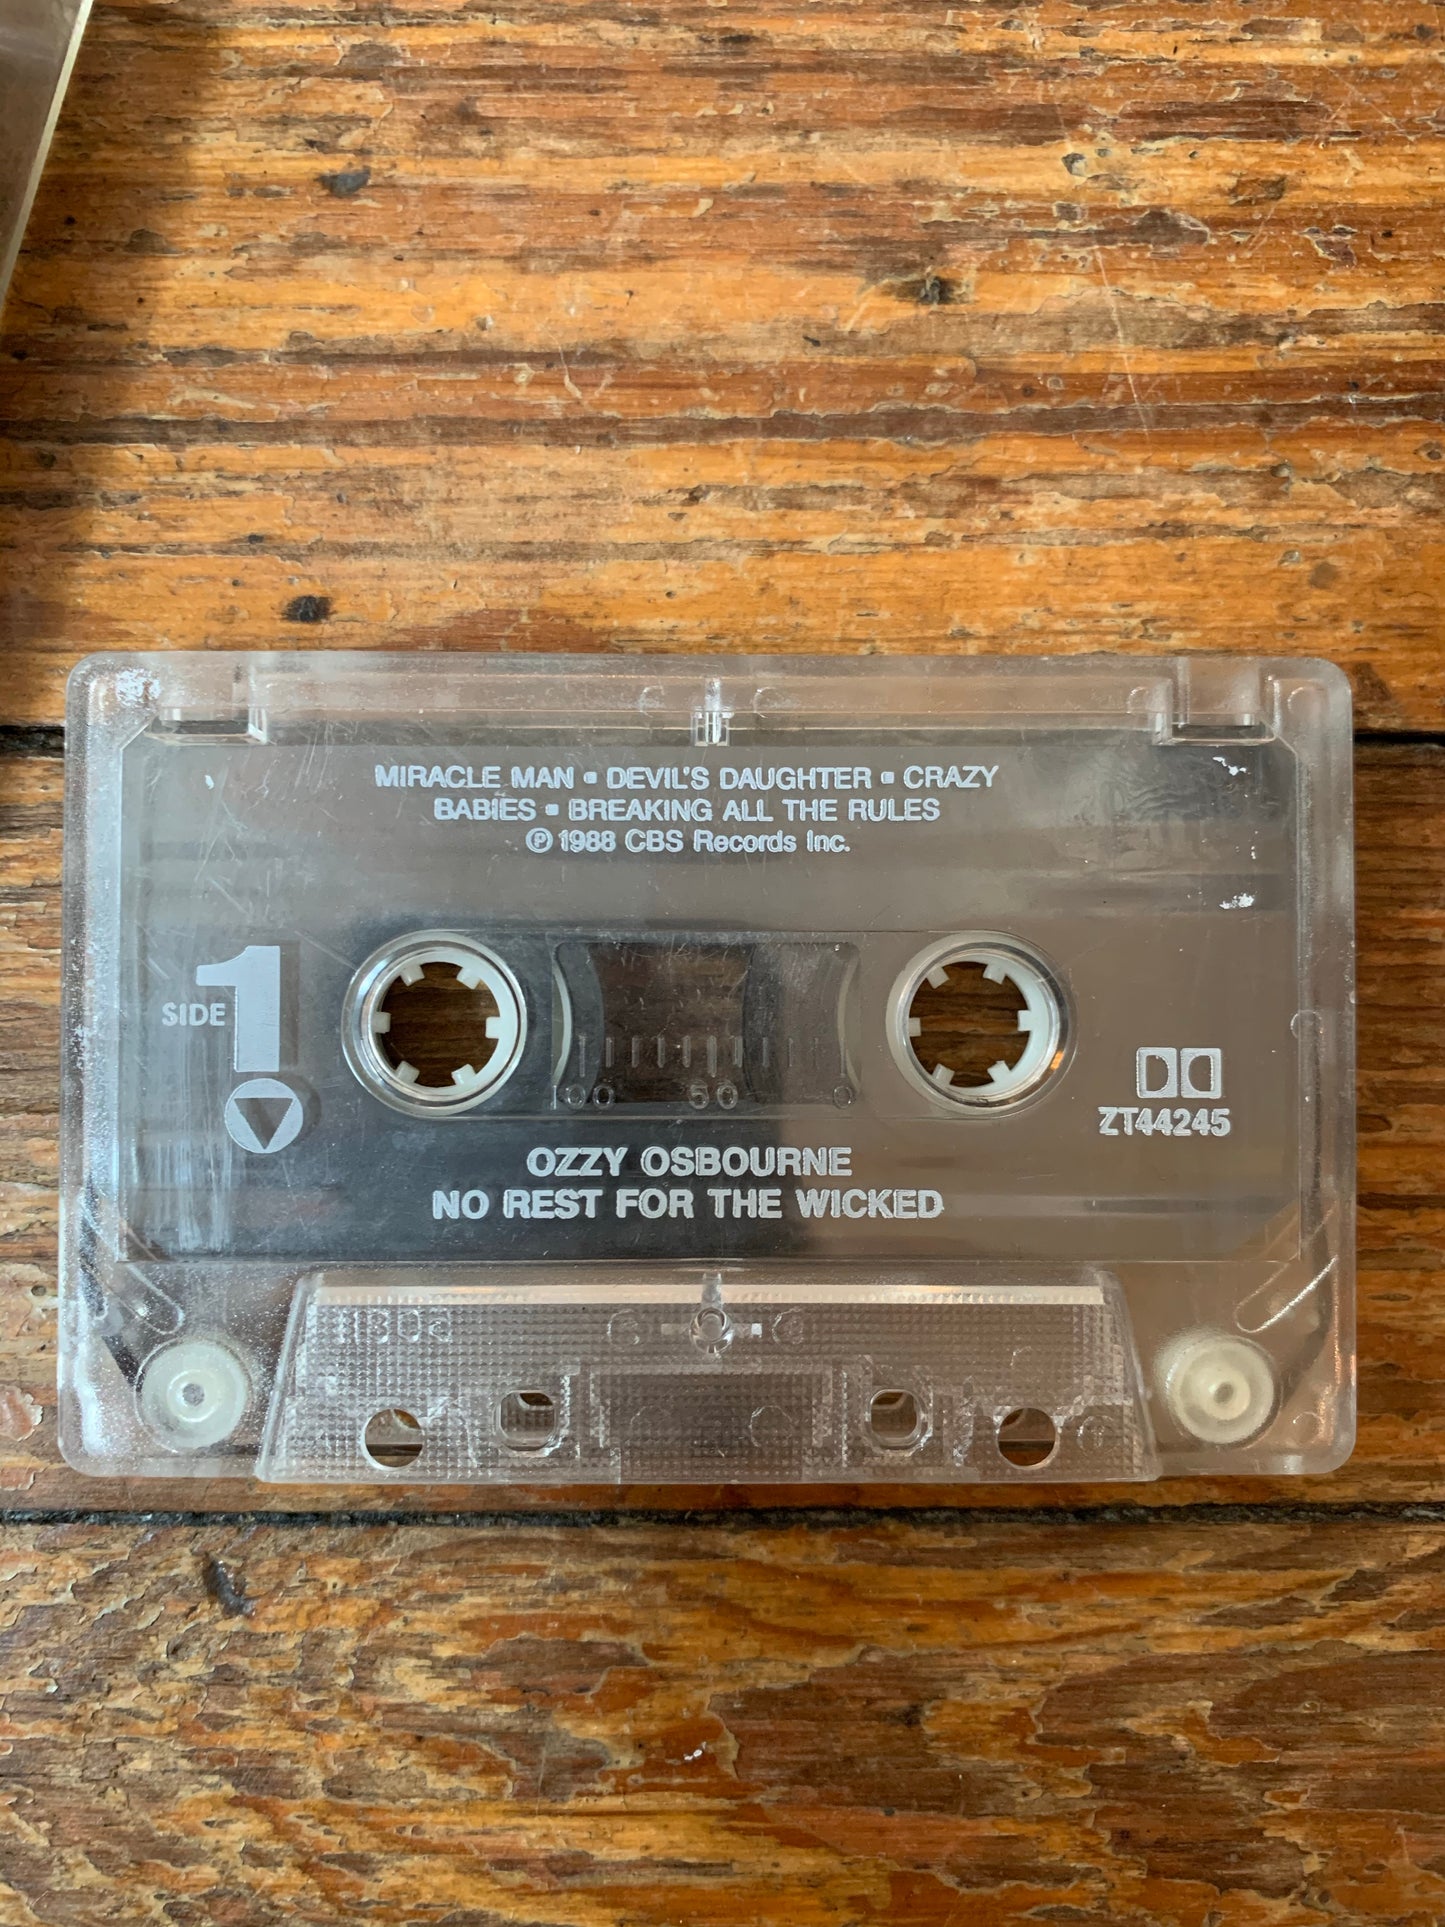 1988 Ozzy Osbourne No Rest For The Wicked Cassette Tape